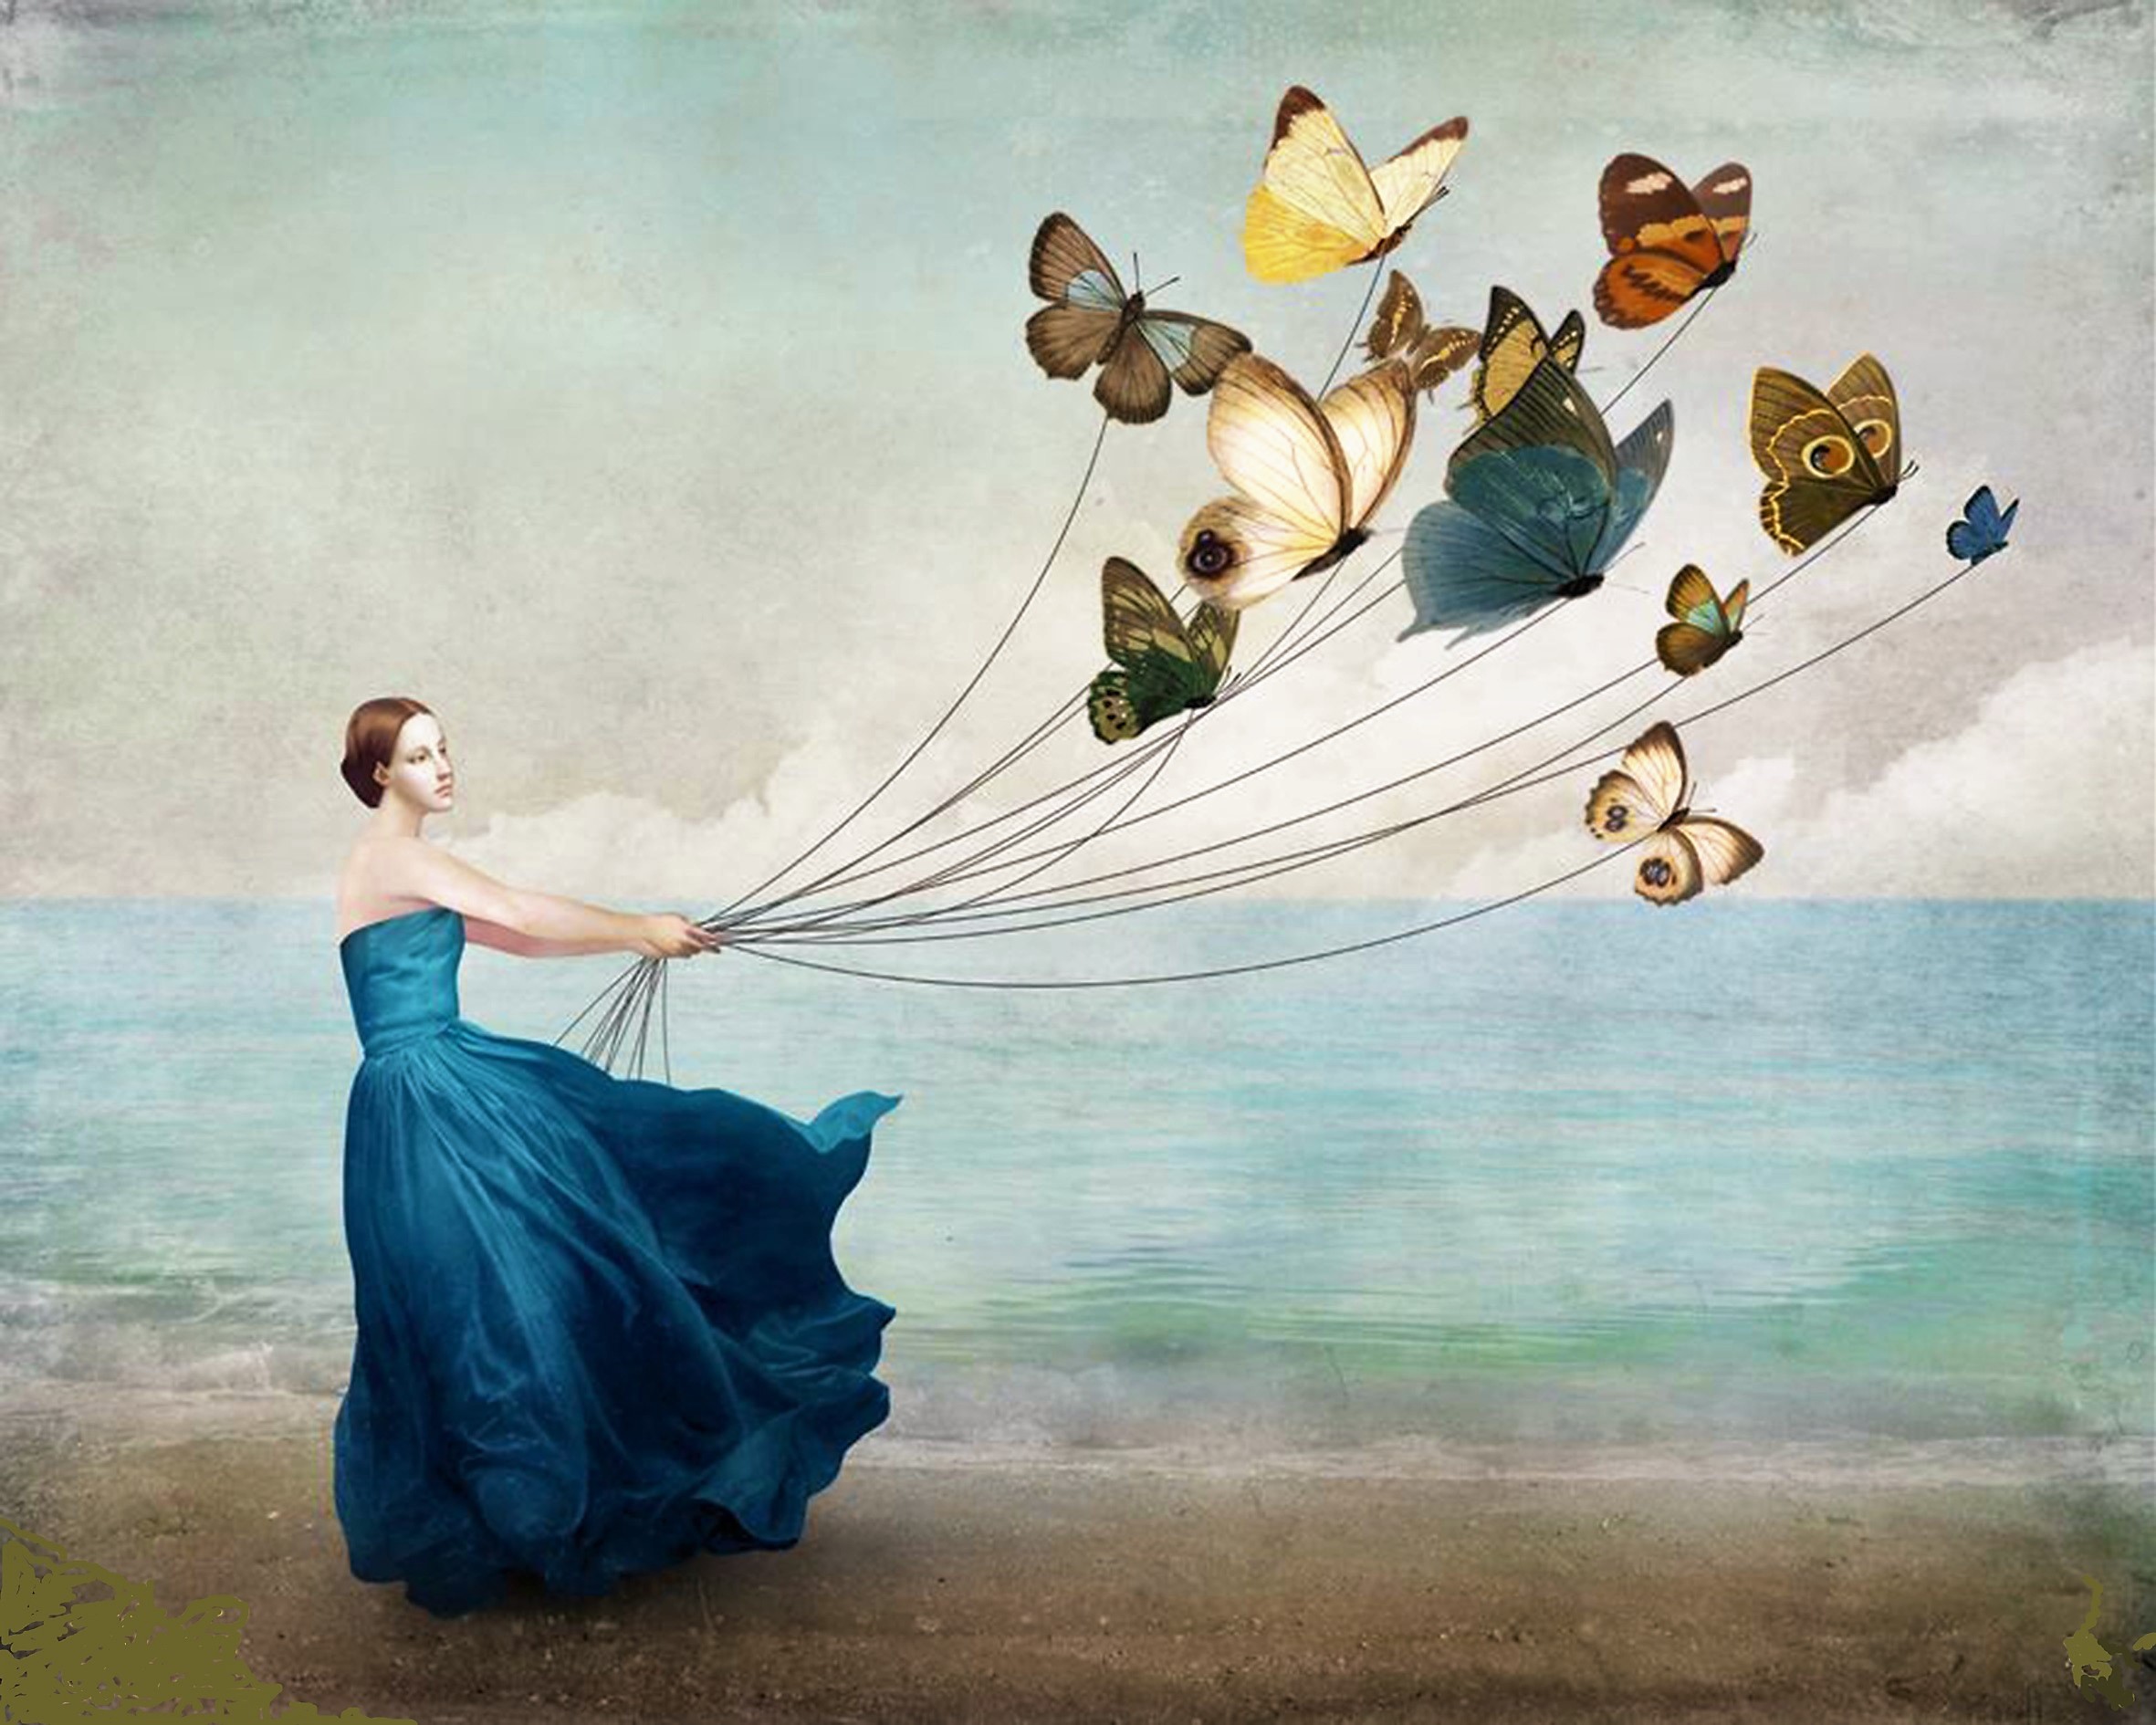 artistic, butterfly, balloon, blue dress, colorful, kite